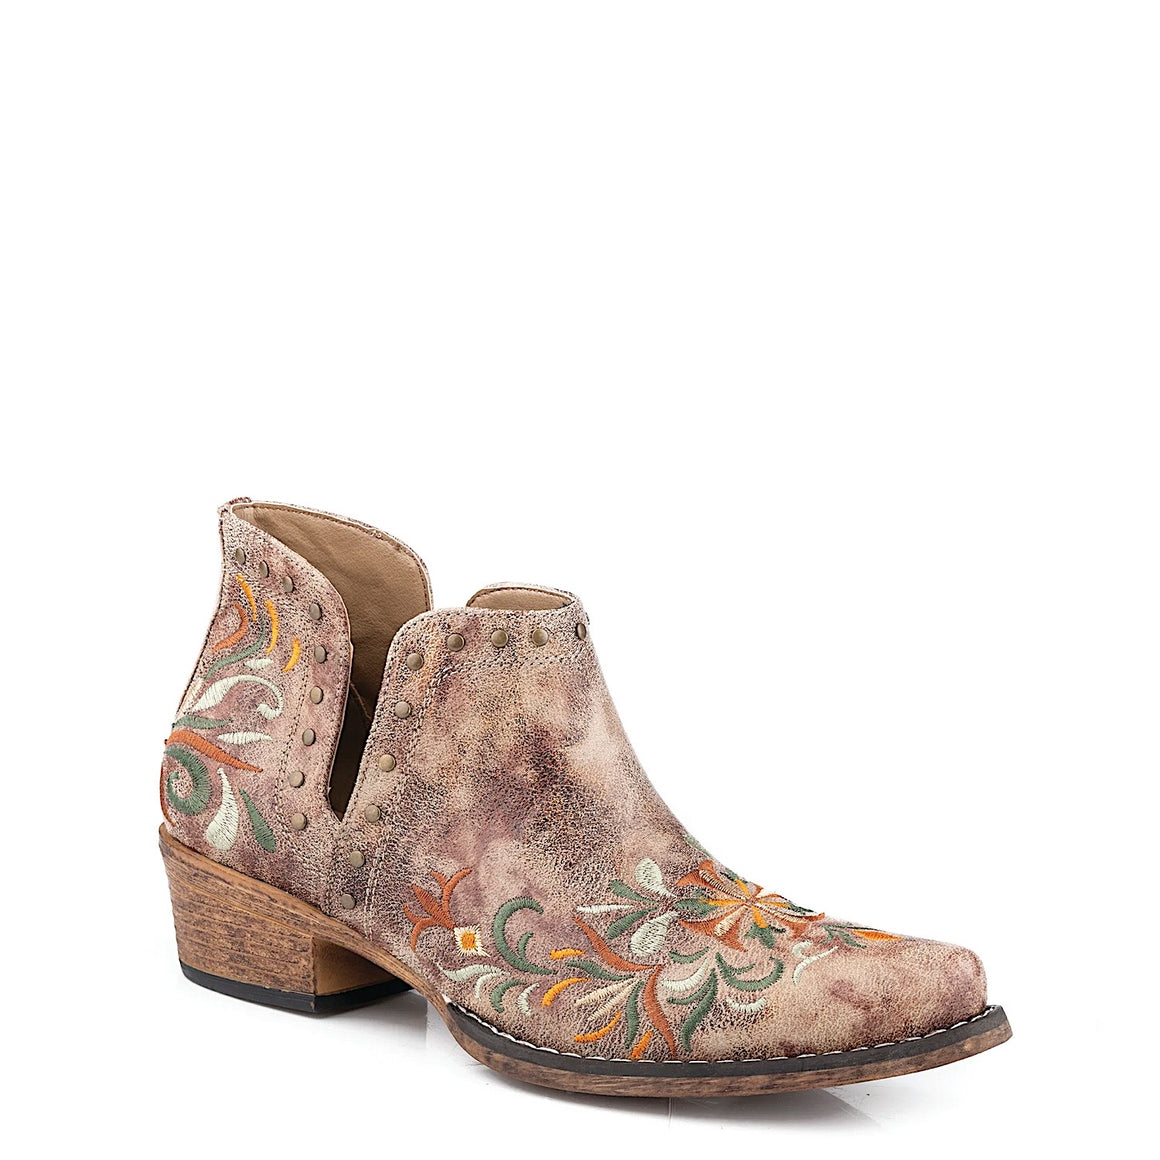 Roper Womens Ava Boot - Floral Tan Embroidered